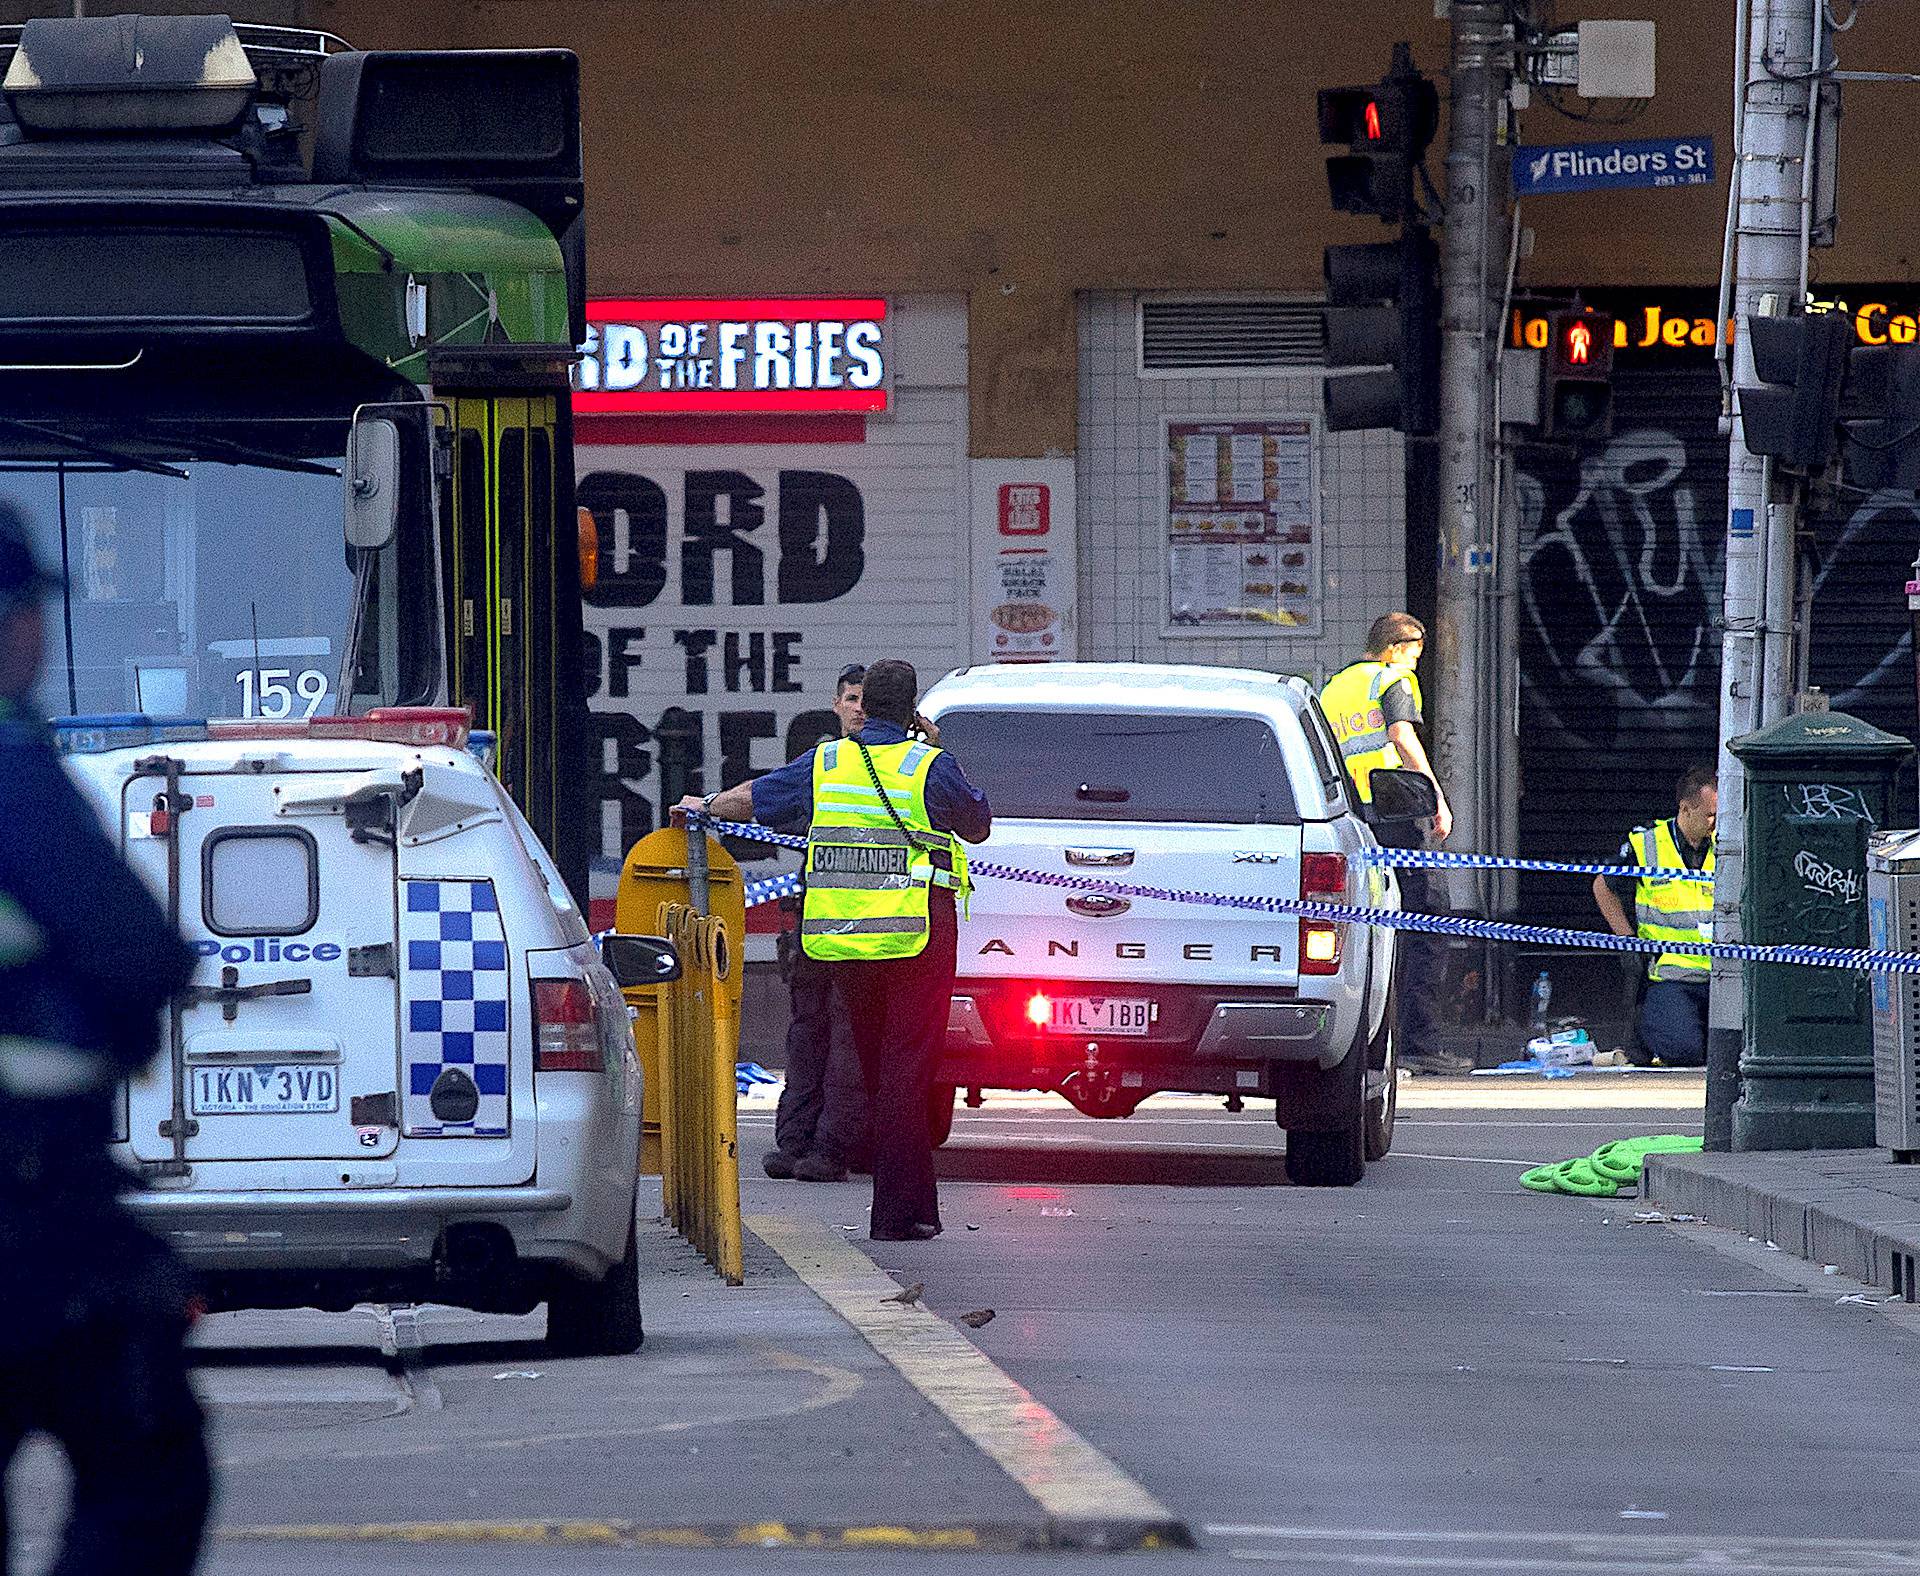 Australian police are seen where a driver was arrested after ploughing into pedestrians at a crowded intersection near the Flinders Street train station in Melbourne